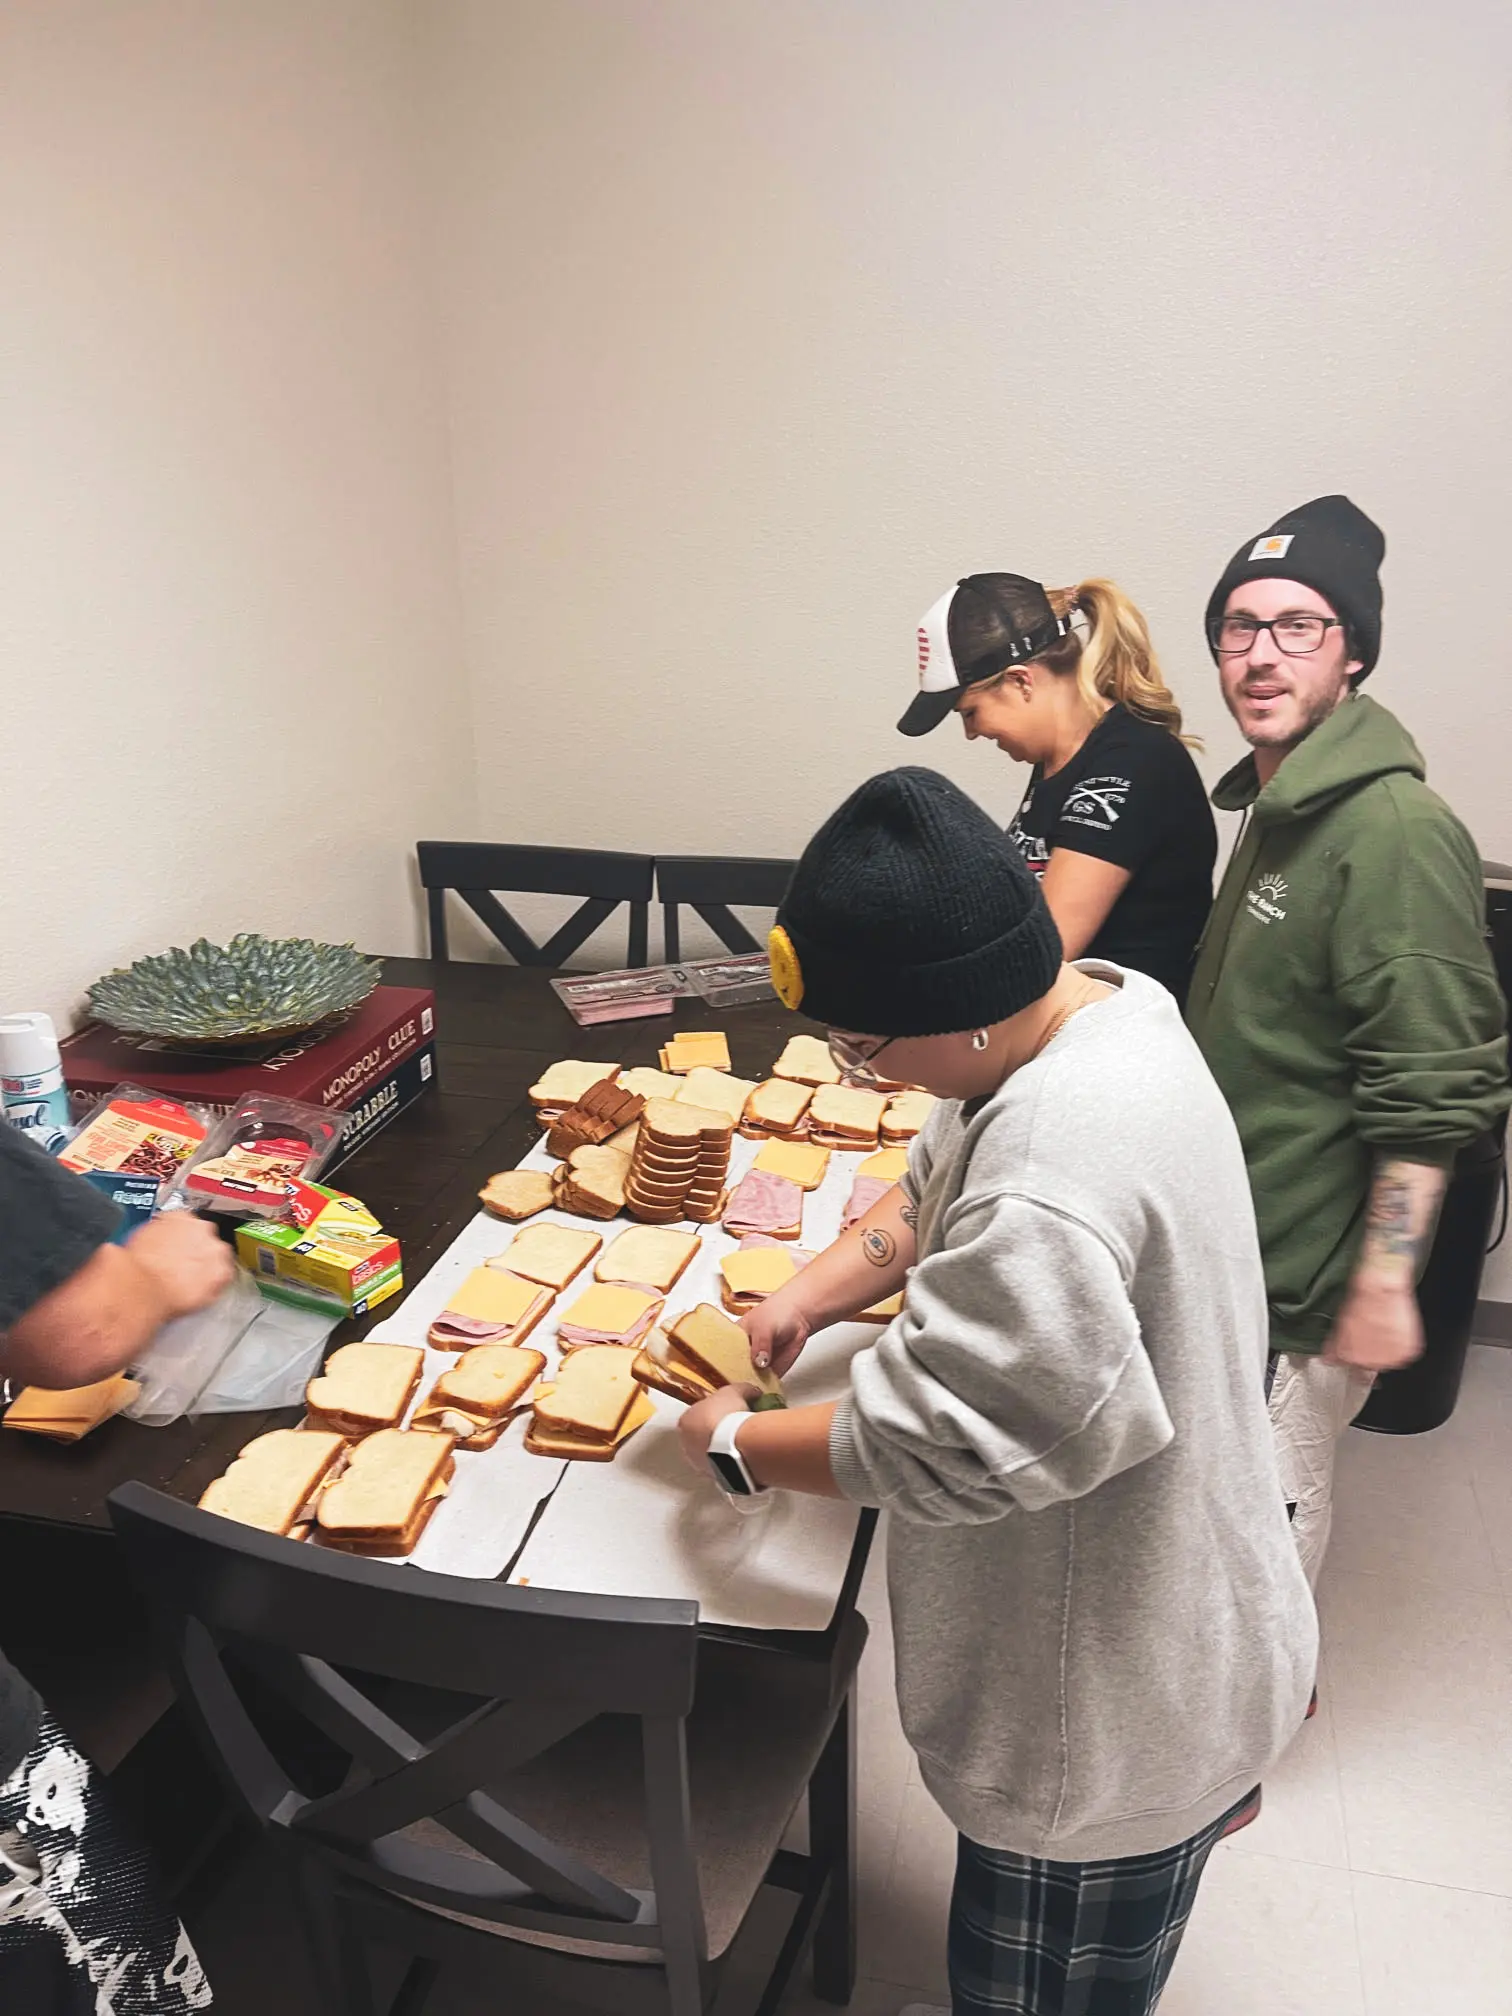 Mental health outpatient volunteer work. Volunteers are making sandwiches for the homeless